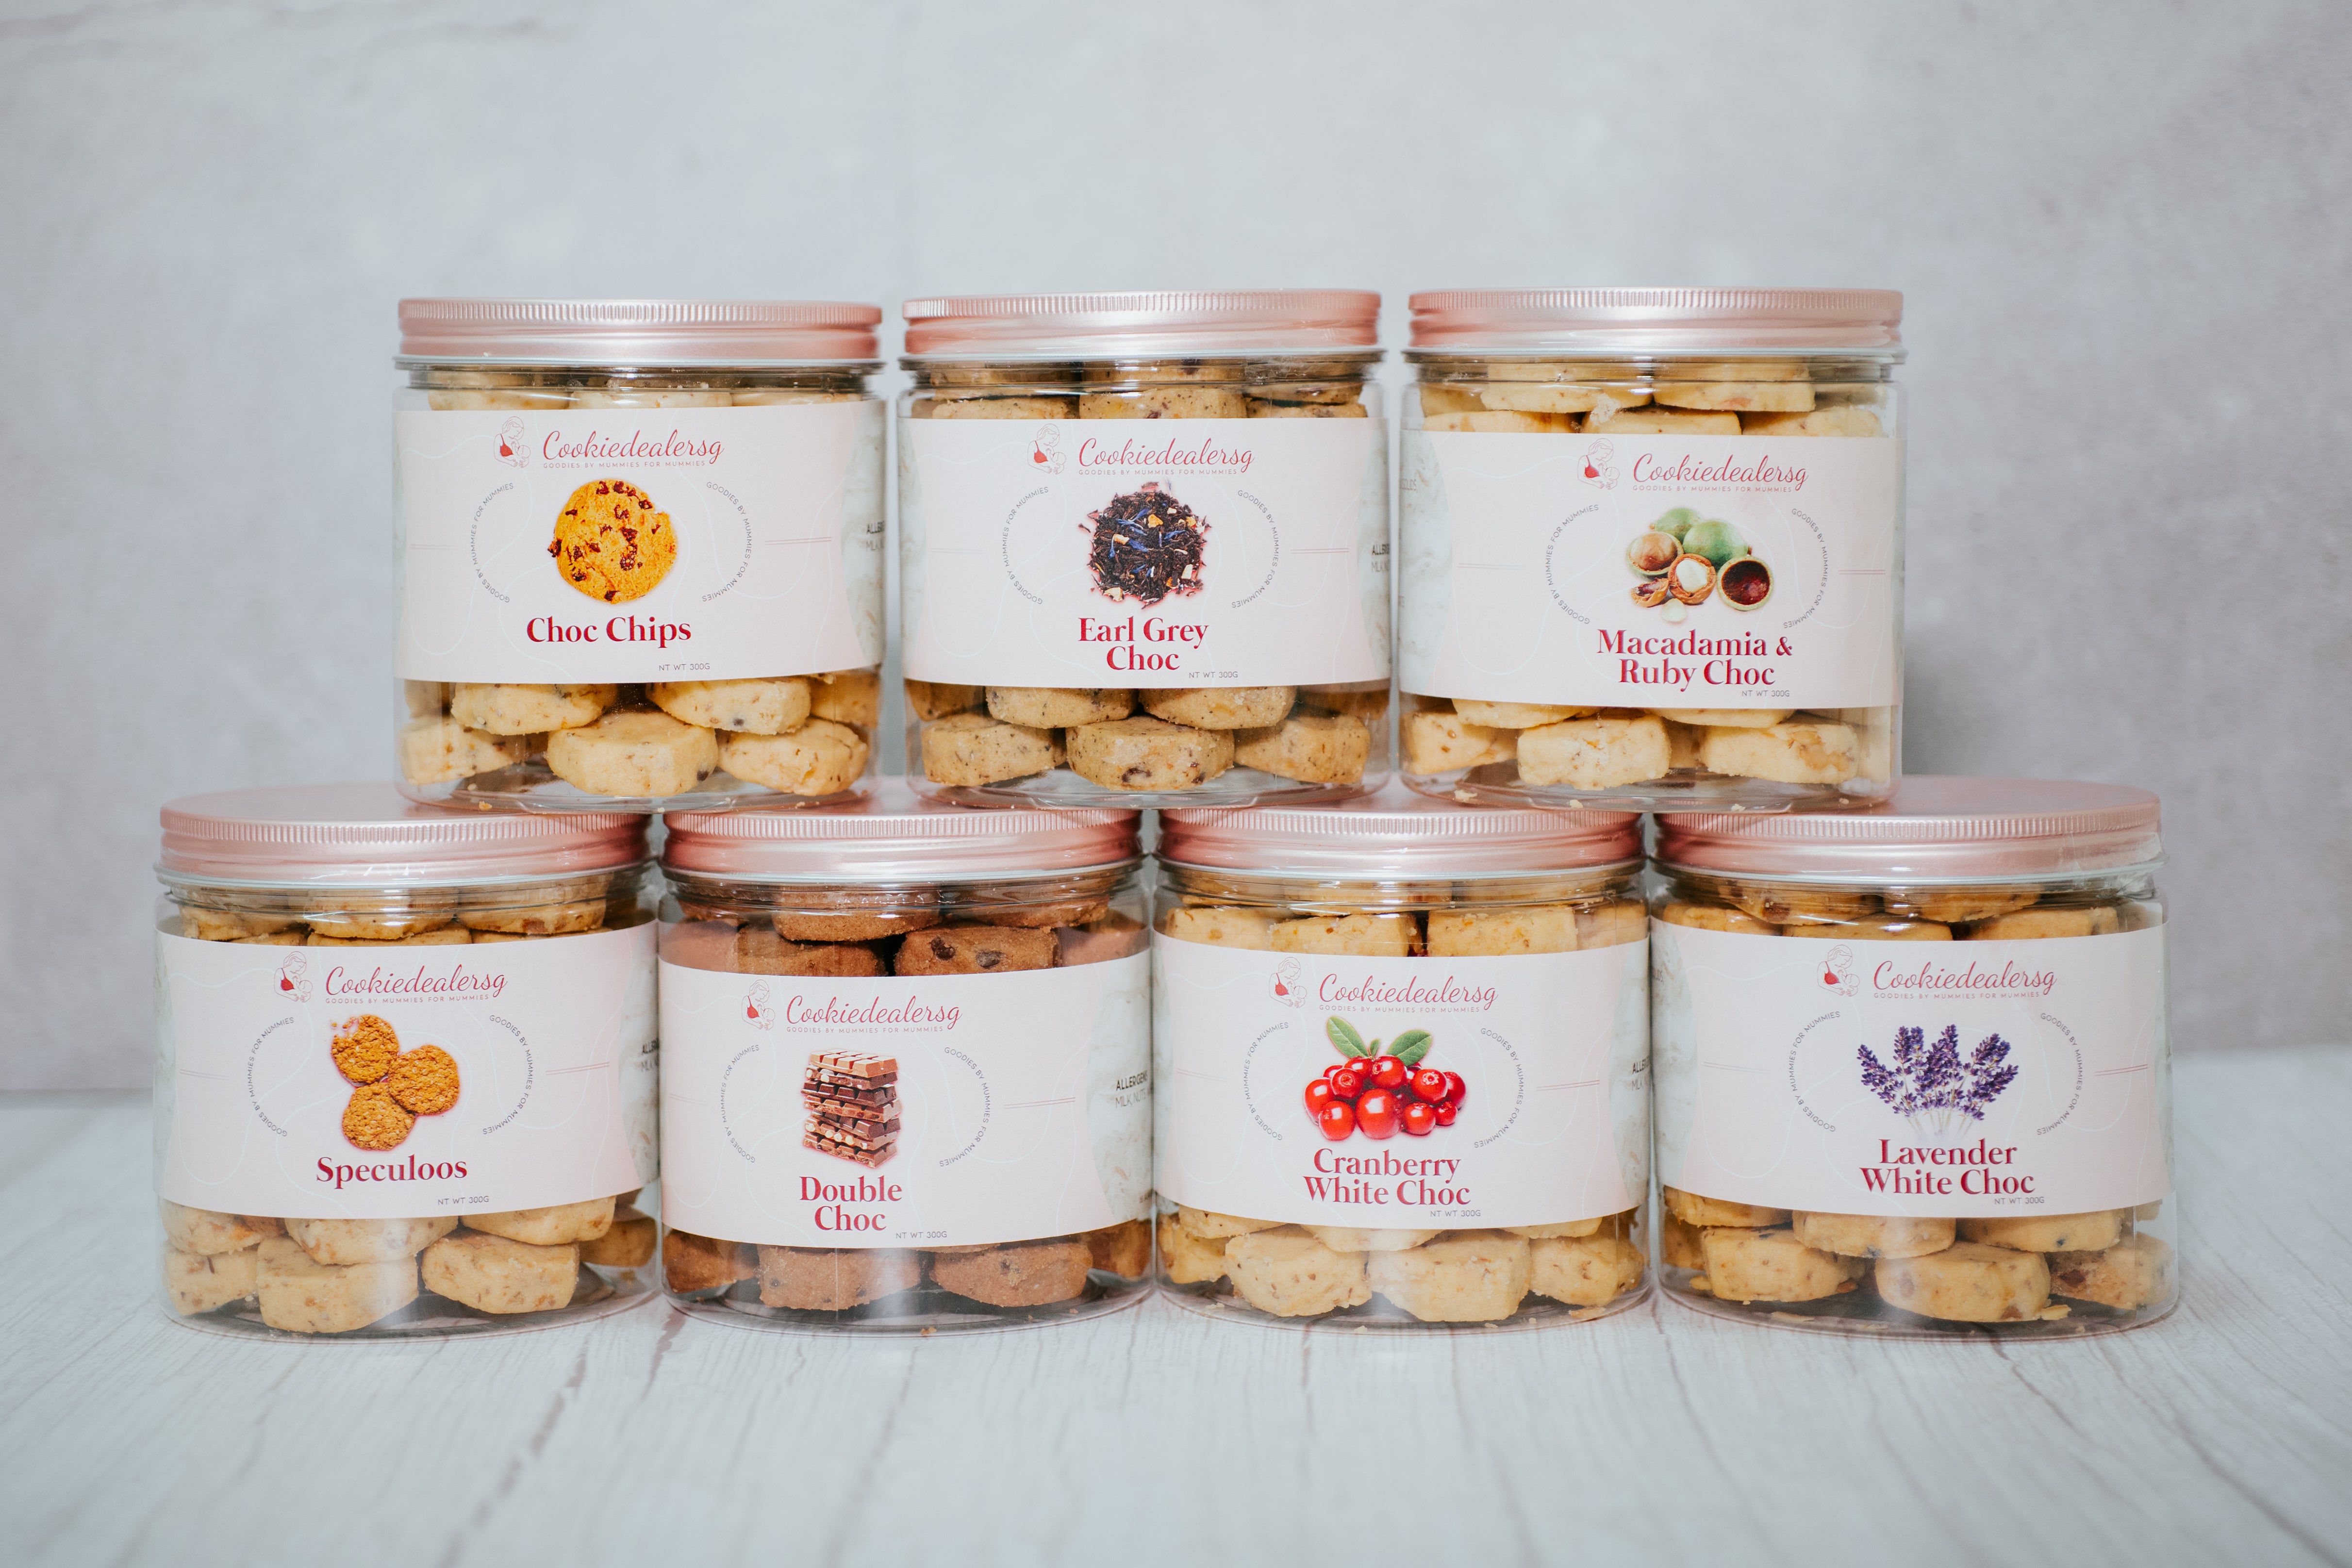 Lactation Cookies - Mouthwatering & exciting flavours!